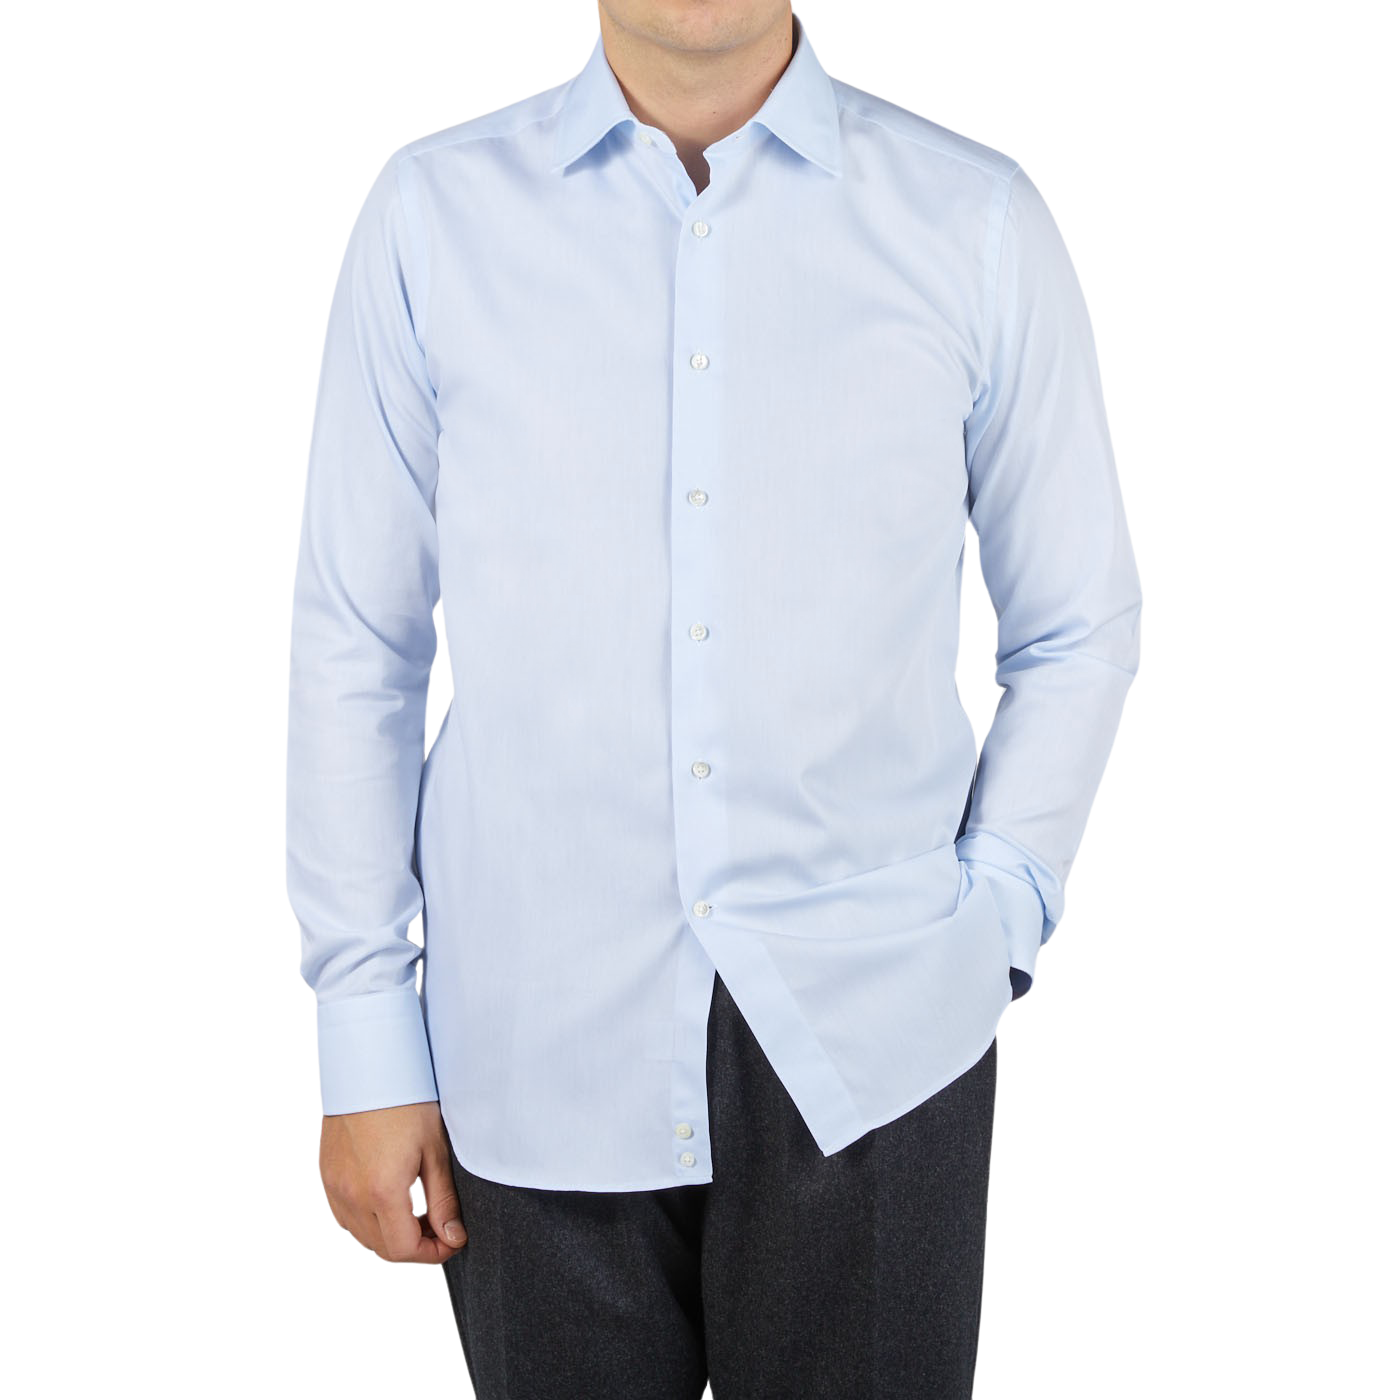 A man wearing a Canali shirt in sky blue dressed.